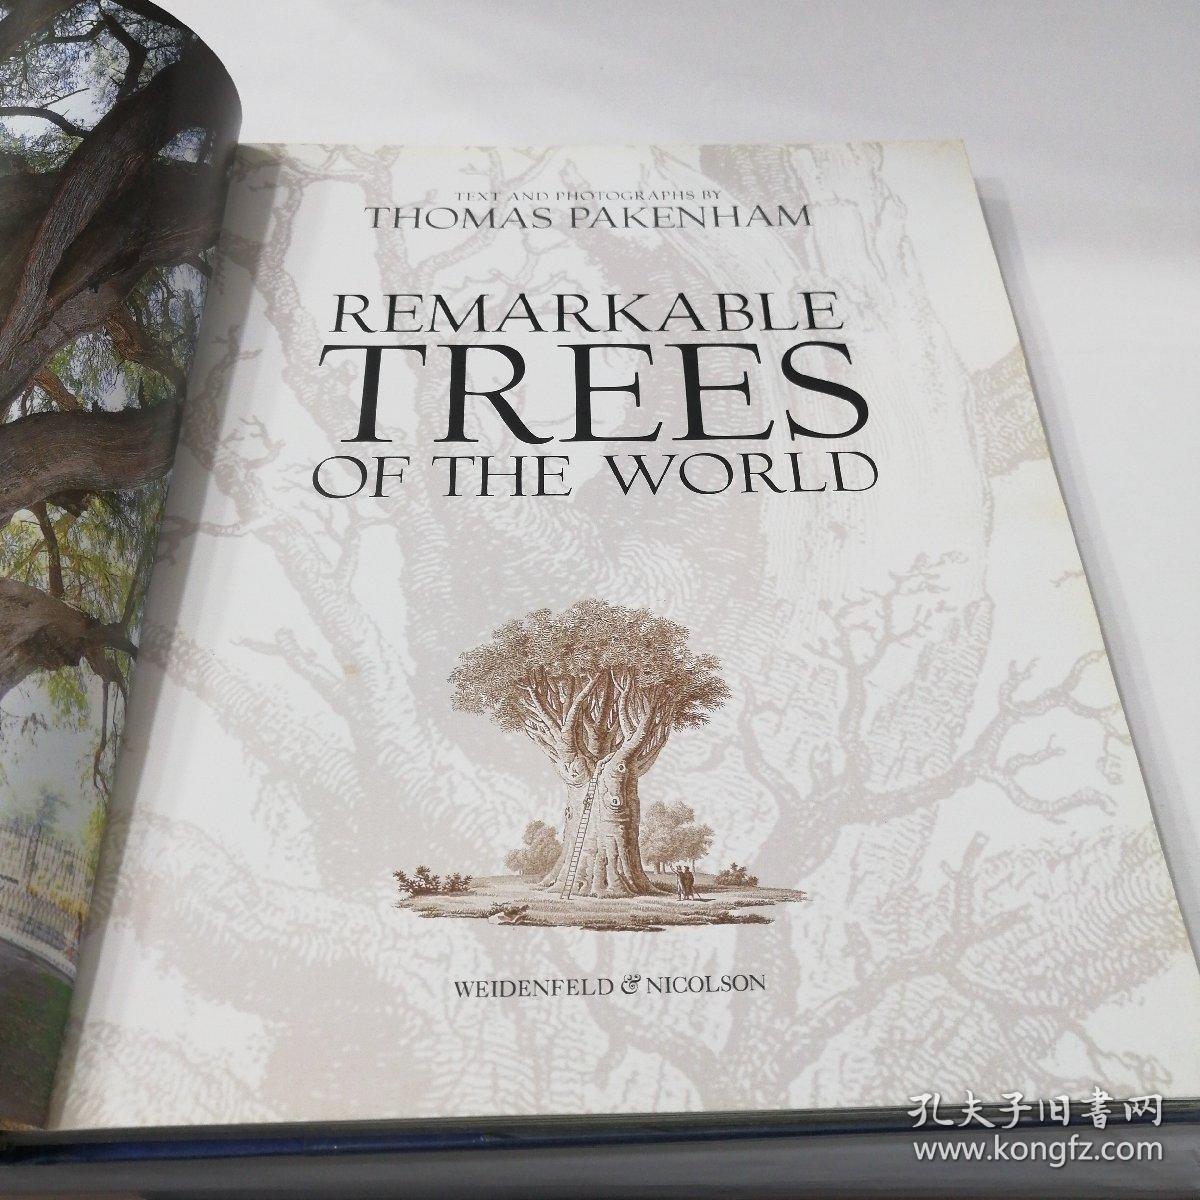 REMARKABLE  TREES  OF THE  WORLD  世界上著名的树木